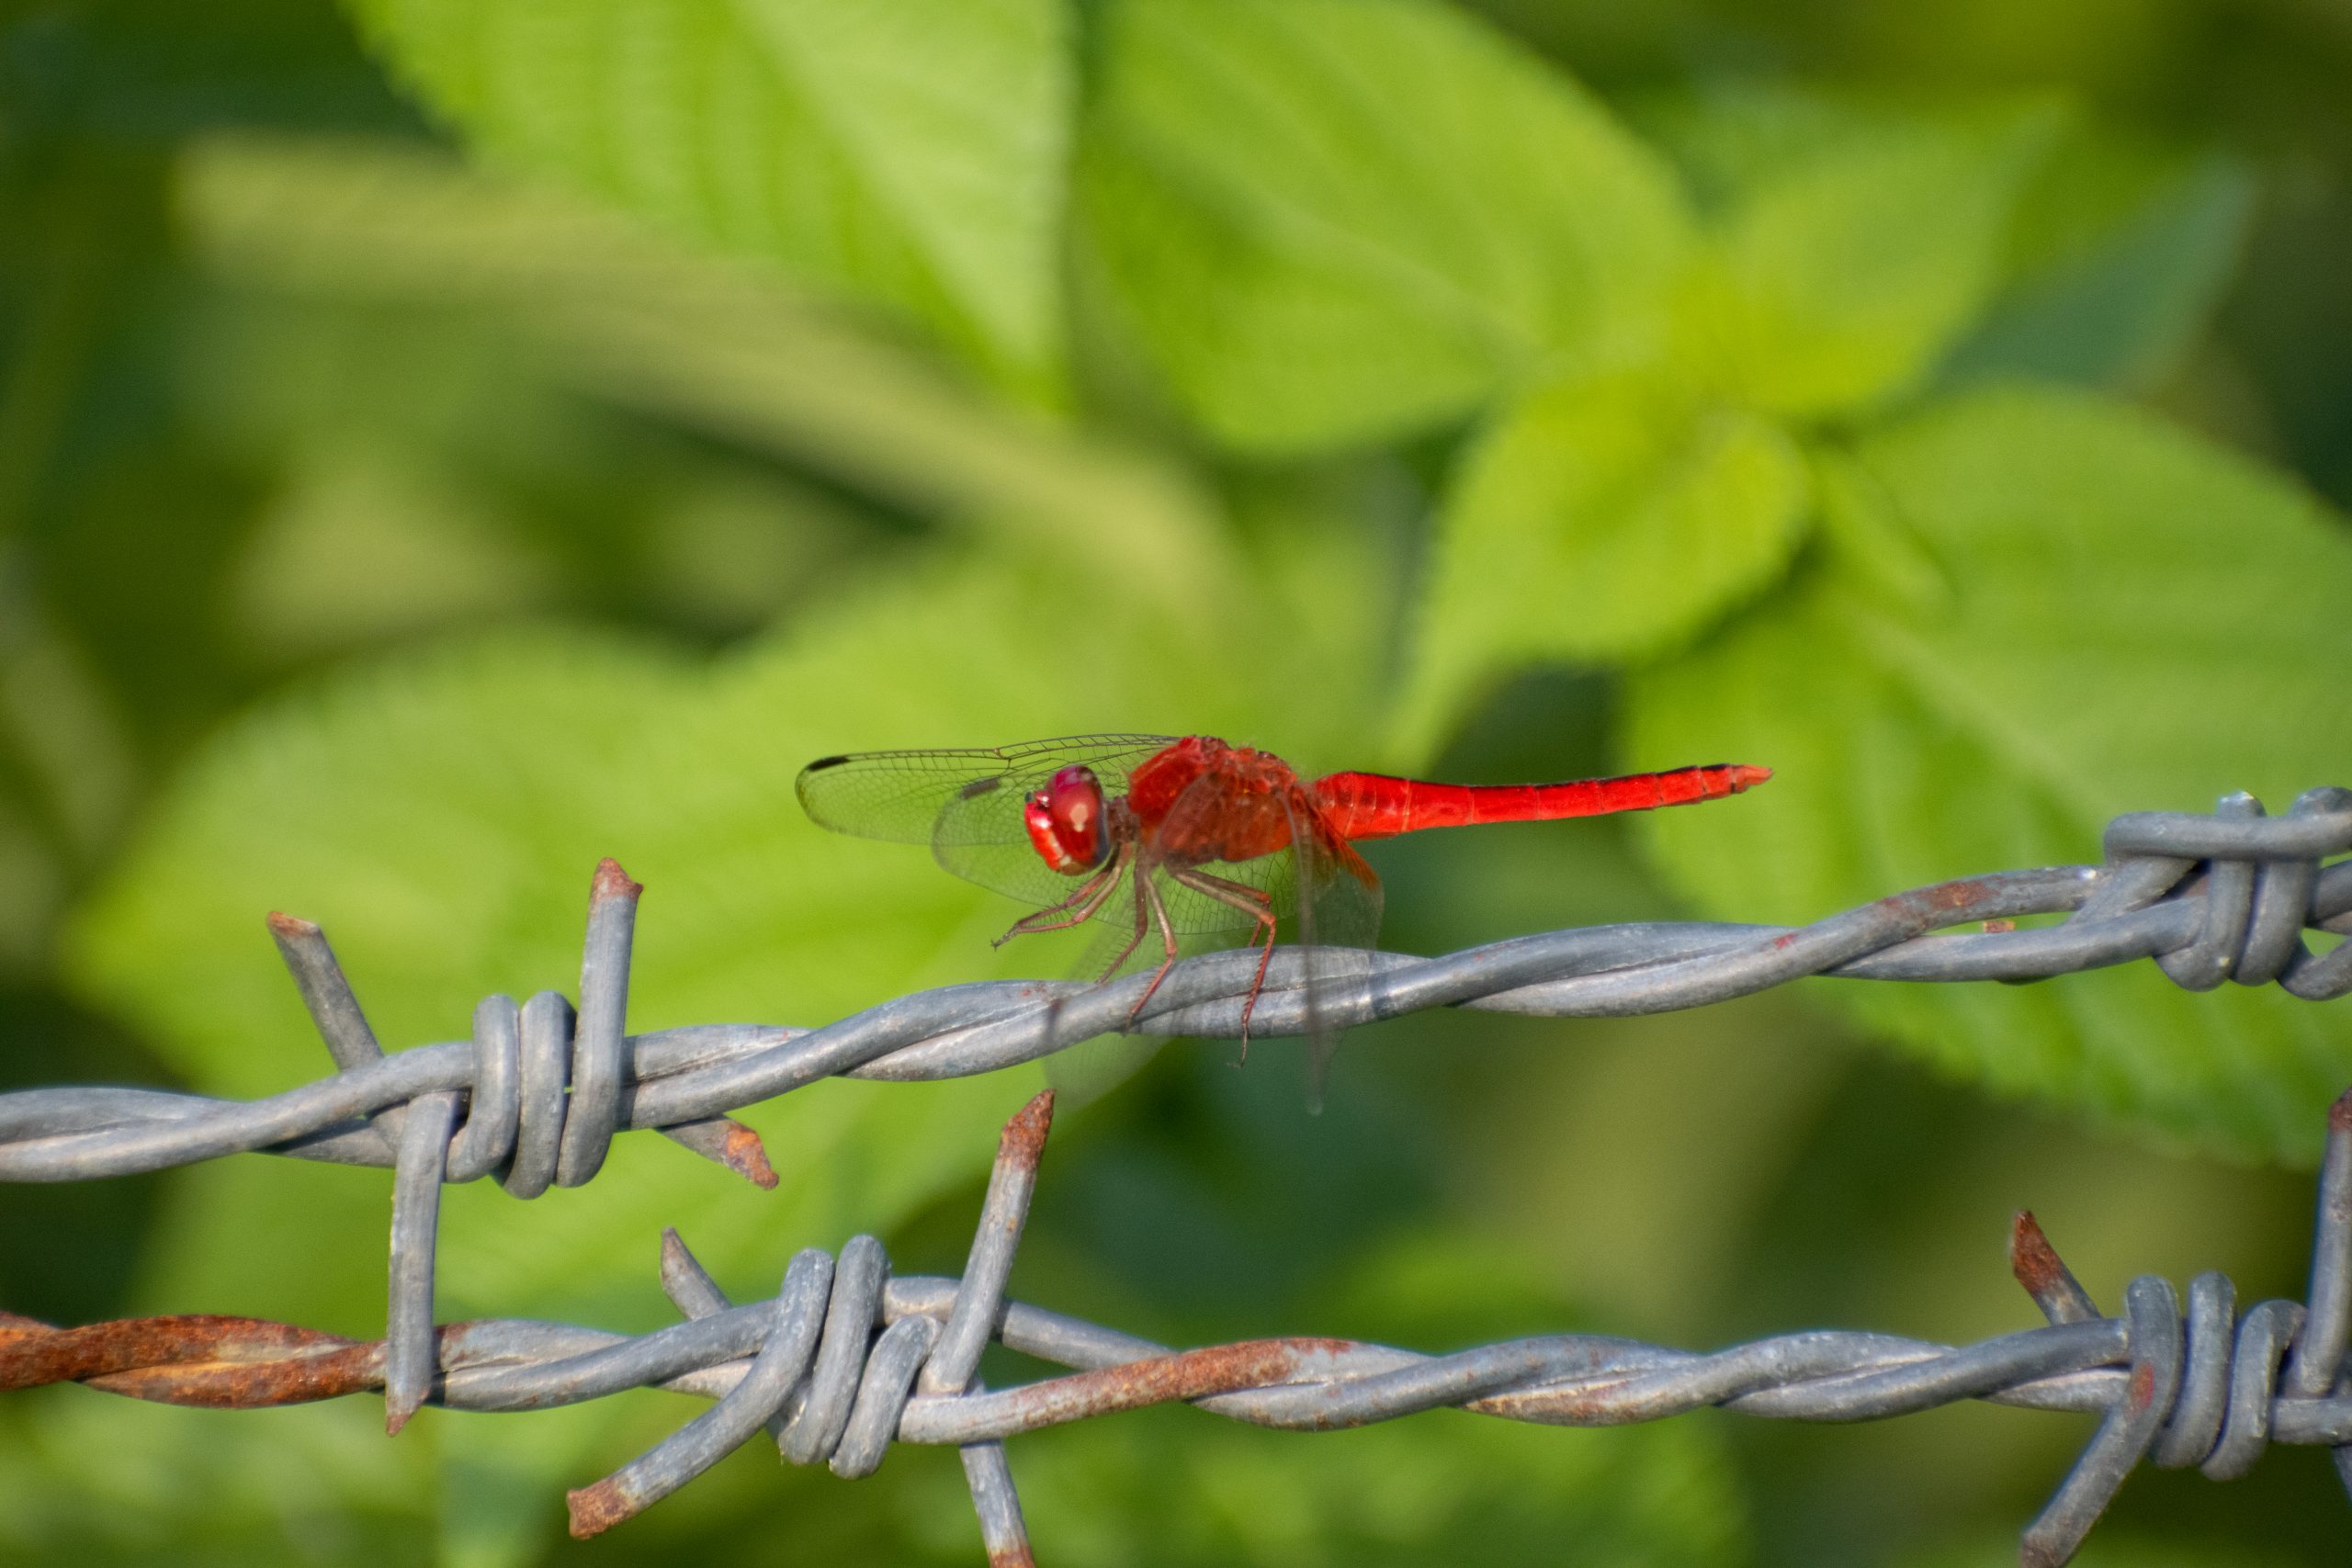 A dragonfly on wire fence